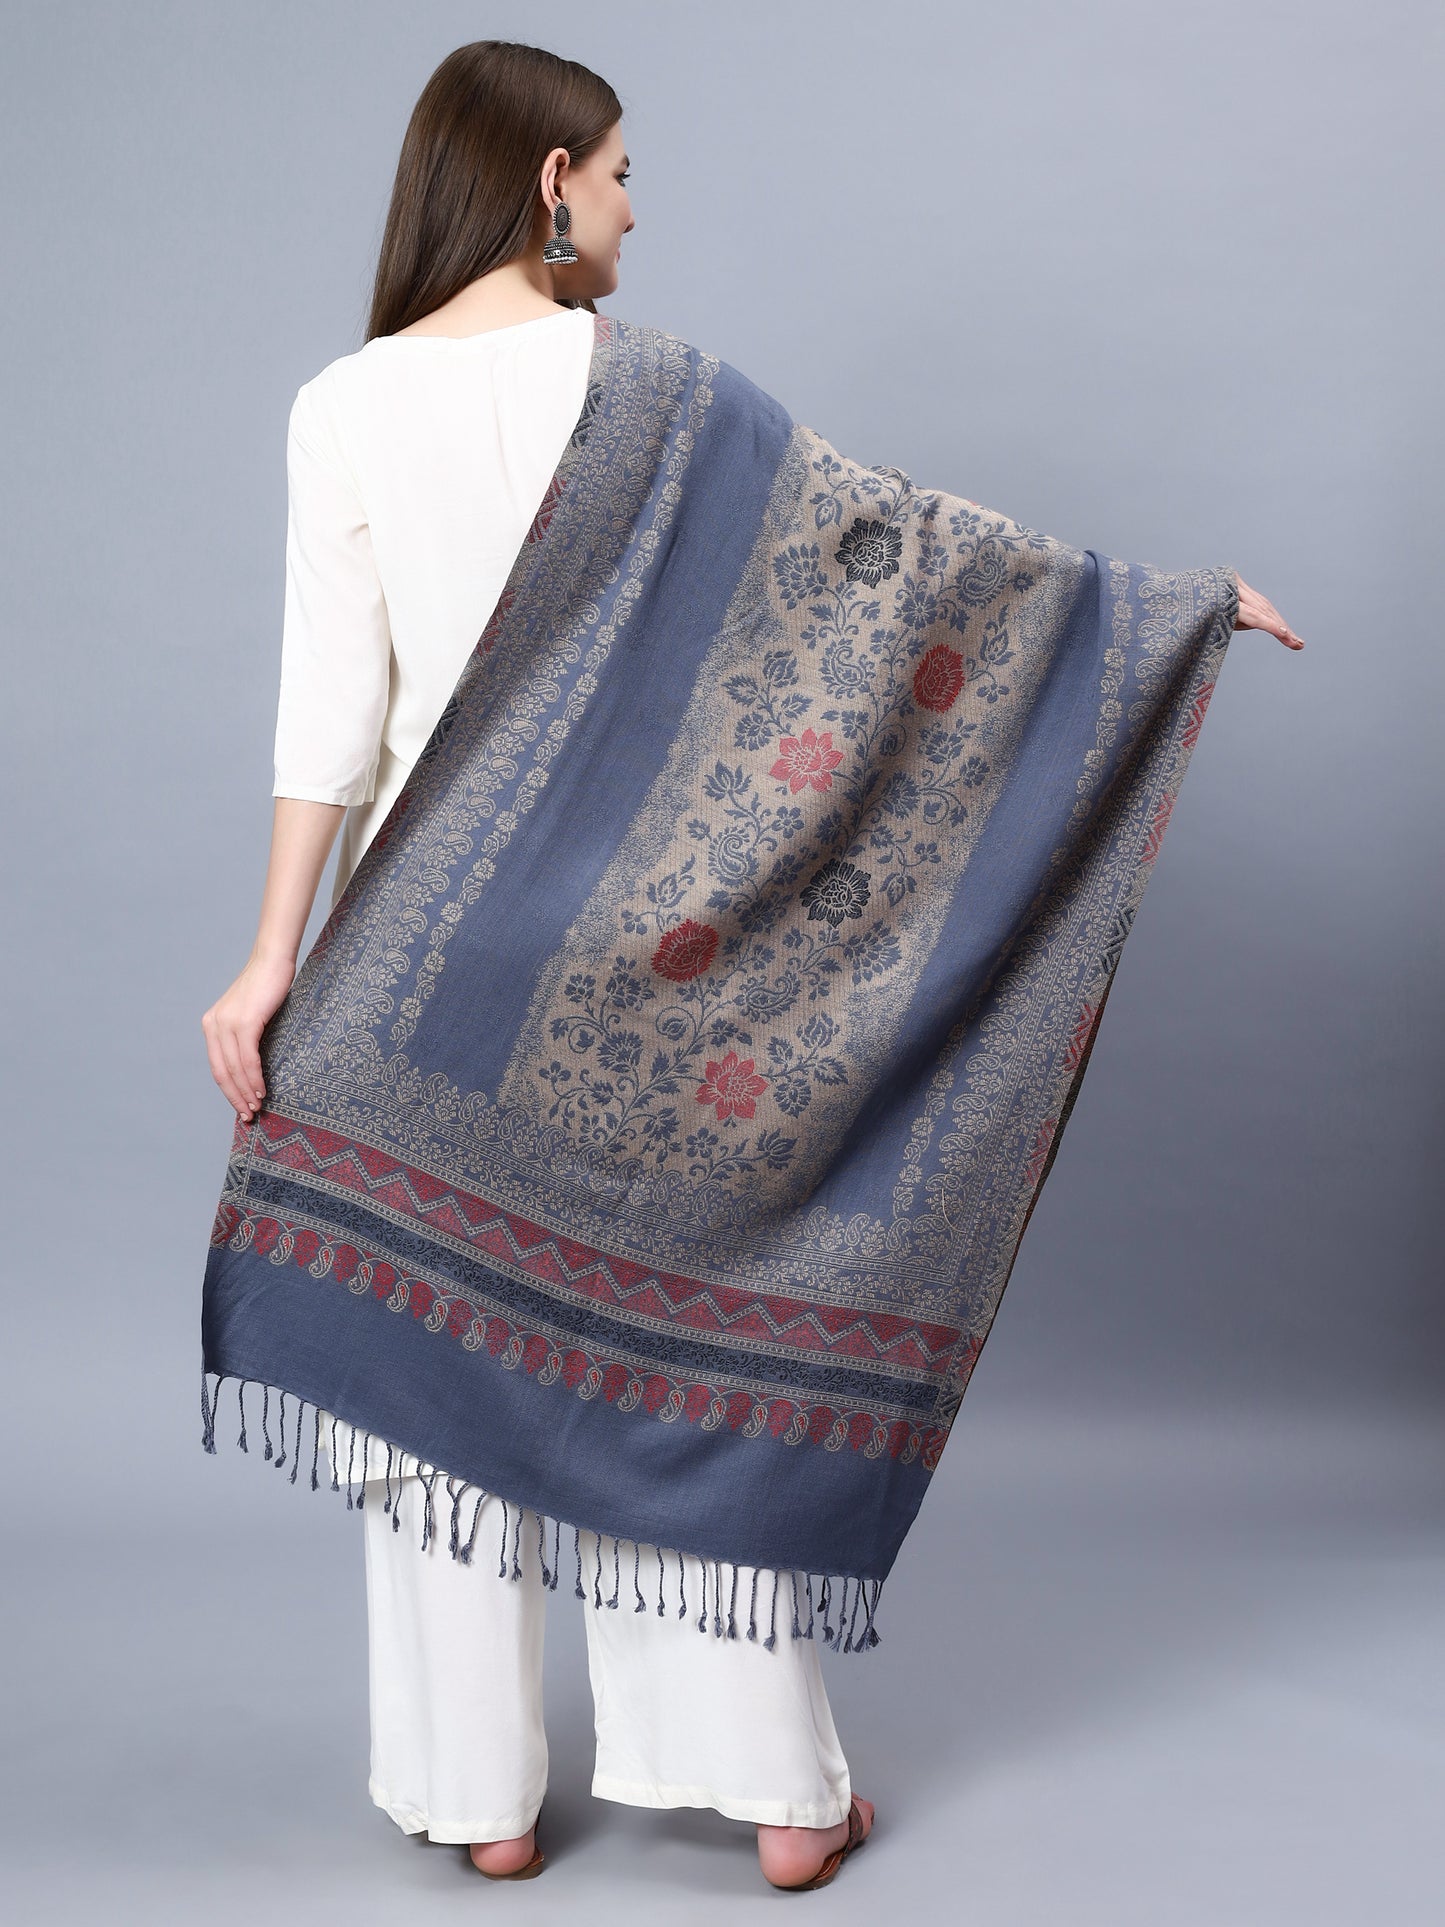 Grey viscose stole with brown and red paisely and floral jacquard pattern